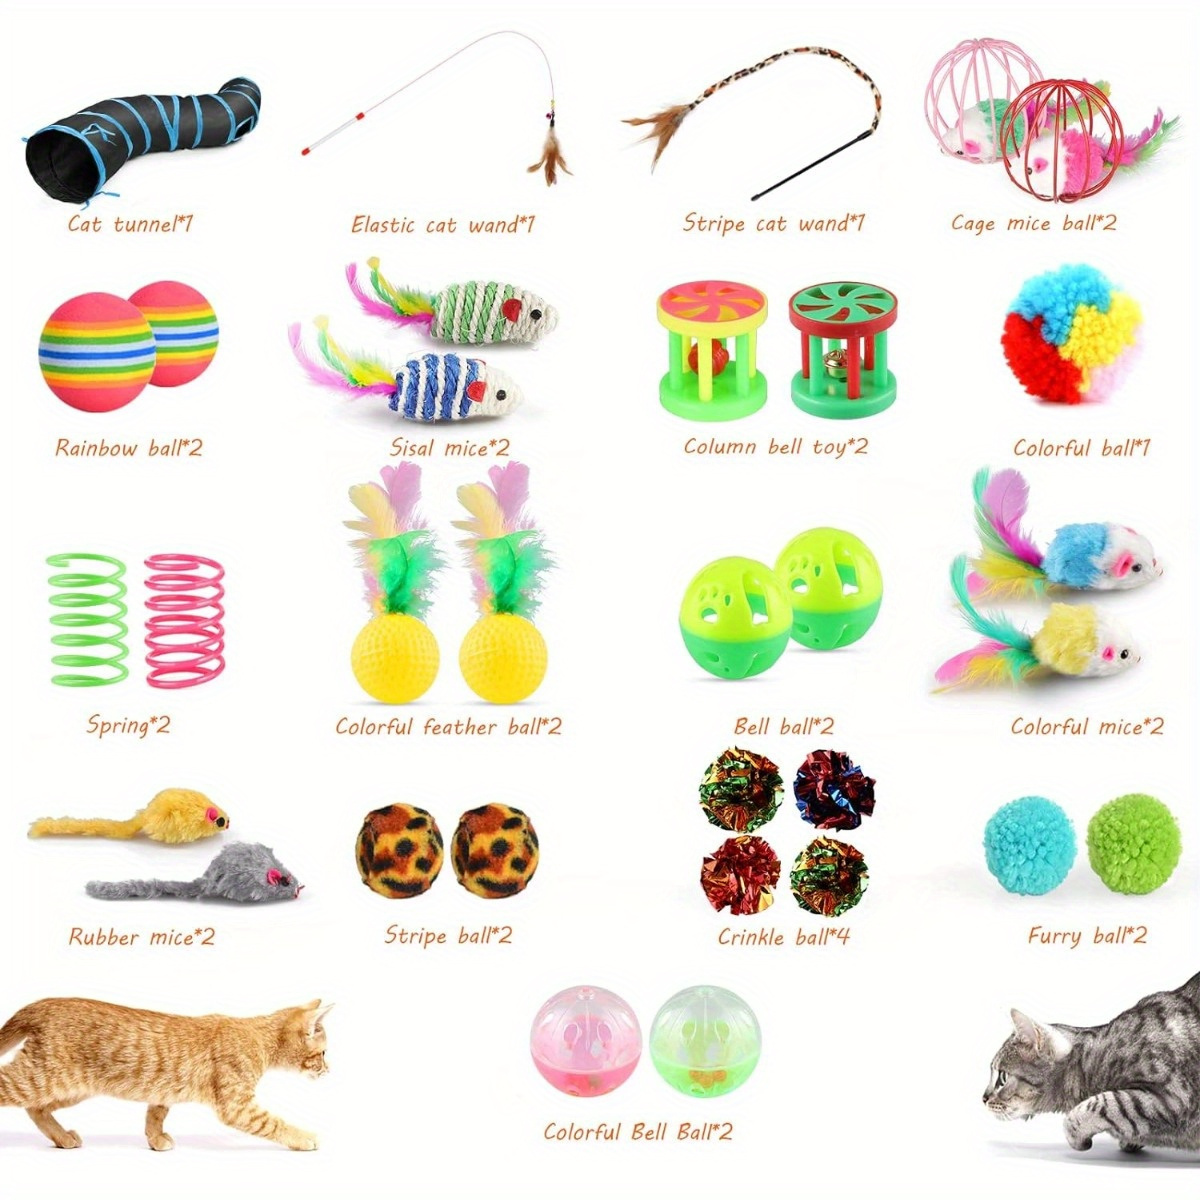 32 PCS Cat Toys Set Kitten Toys Assortments Including 2 Way Rainbow Tunnel  Cat Feather Teaser Wand Sisal Mice Bell Balls Crinkle Balls Interactive Cat